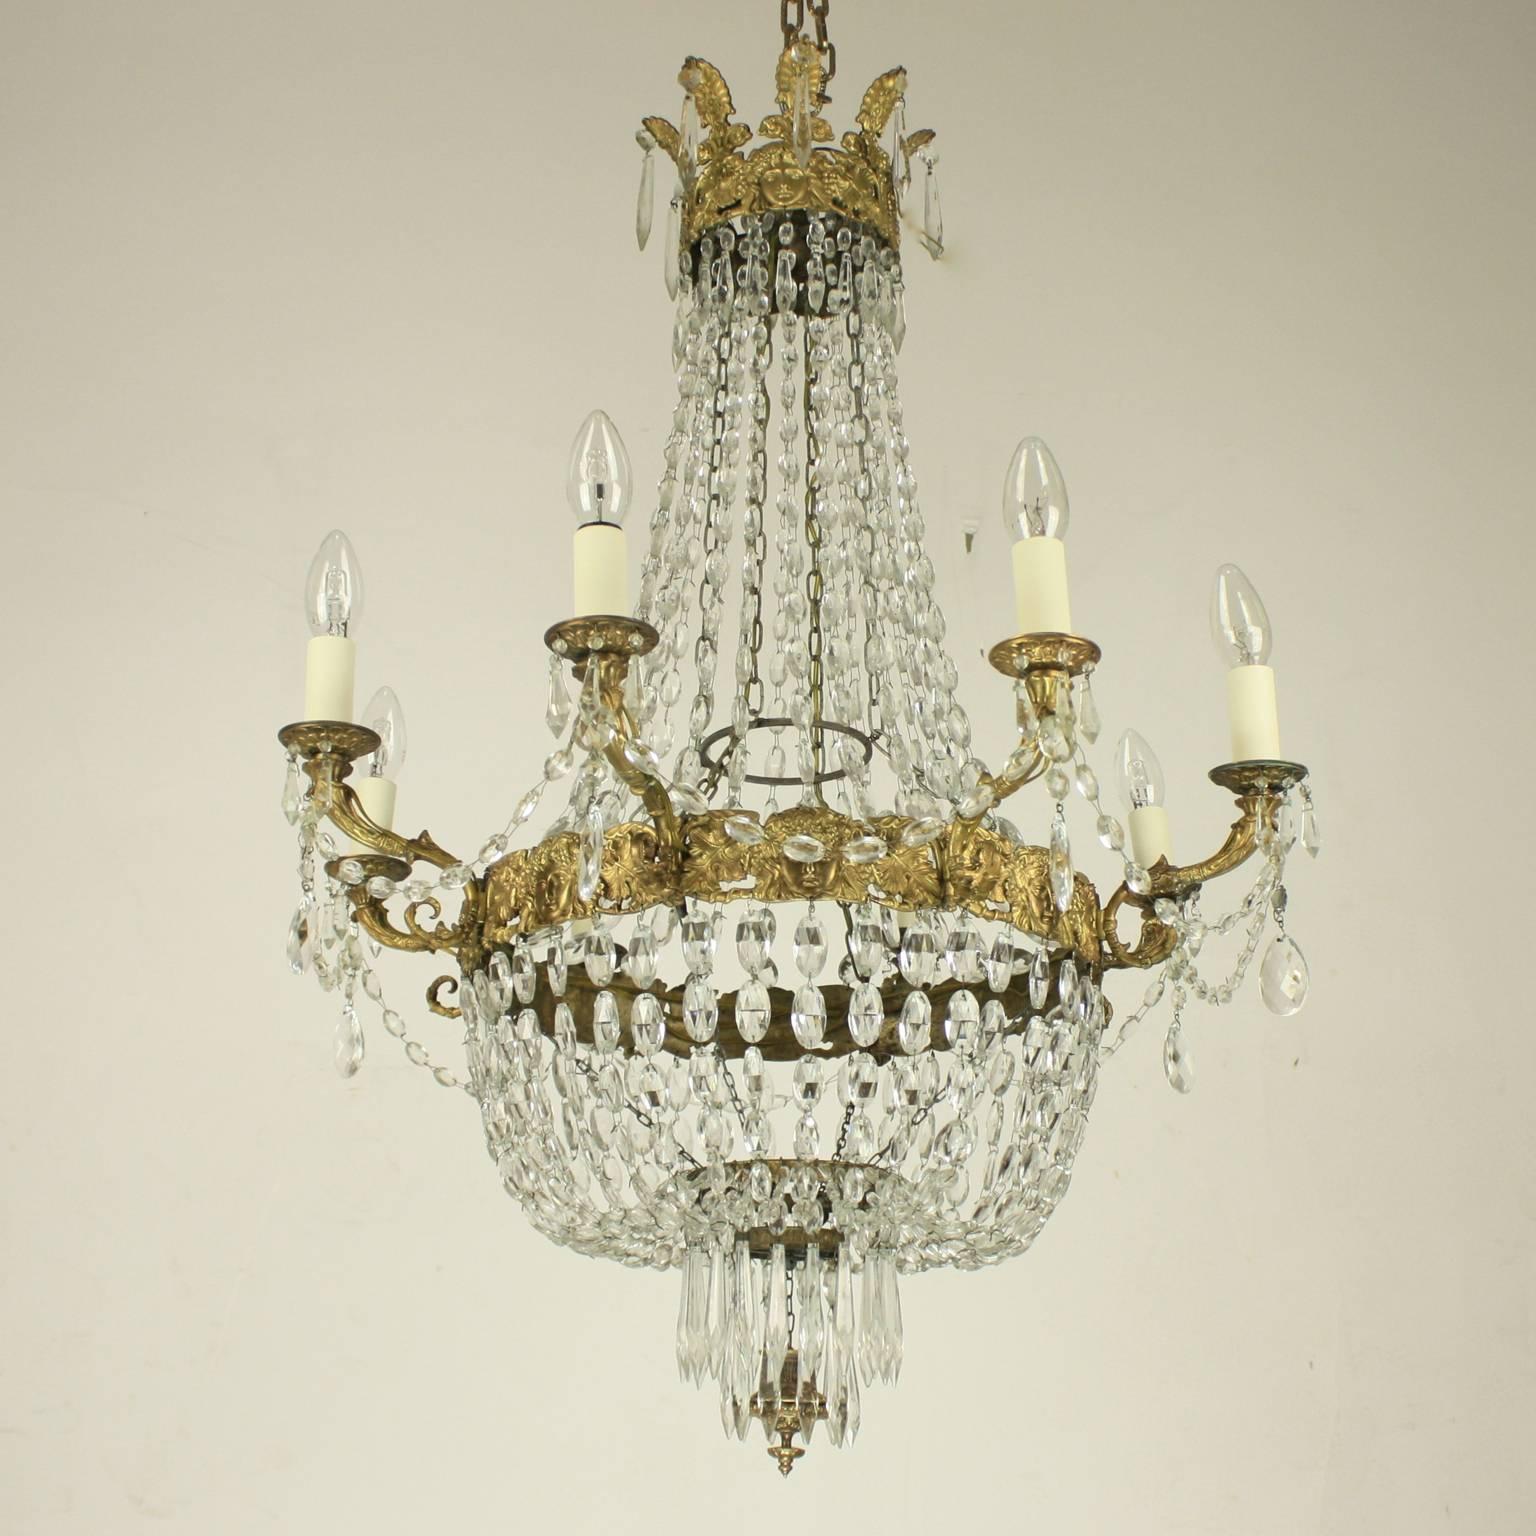 Late 19th Century French Gilt Bronze Crystal Bacchus' Heads Basket Chandelier

A late 19th century French gilt bronze and cut-crystal basket chandelier with an anthemion cast corona featuring further vine leaves alternating with masks of bacchus,